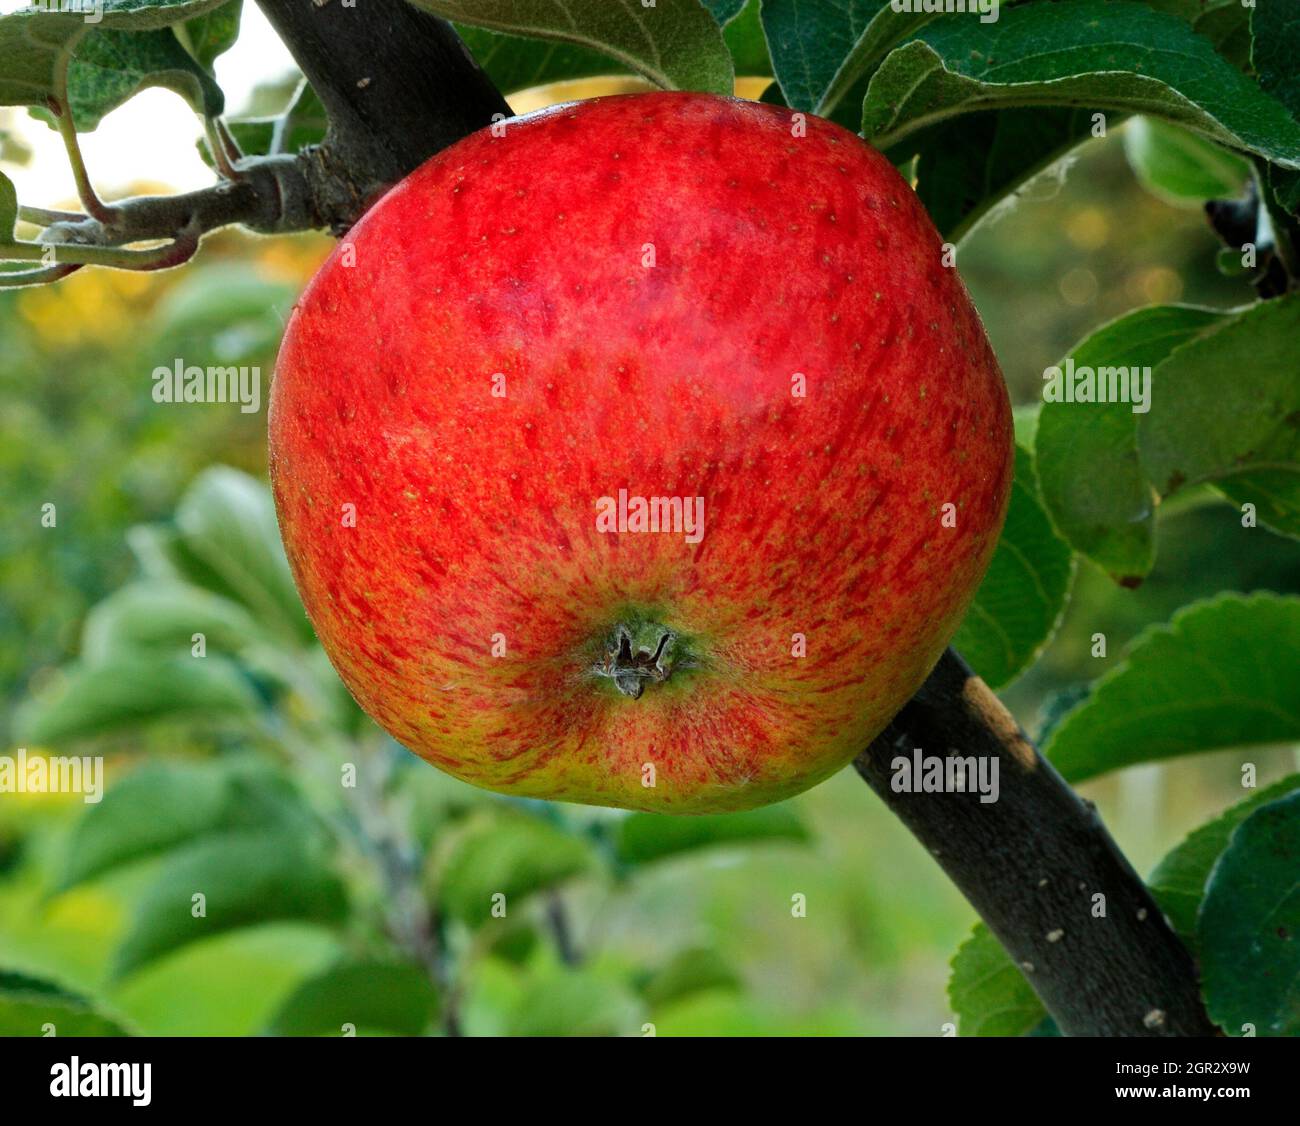 Apple 'Jolly Miller',  apples, fruit, malus domestica, healthy eating, growing on tree Stock Photo